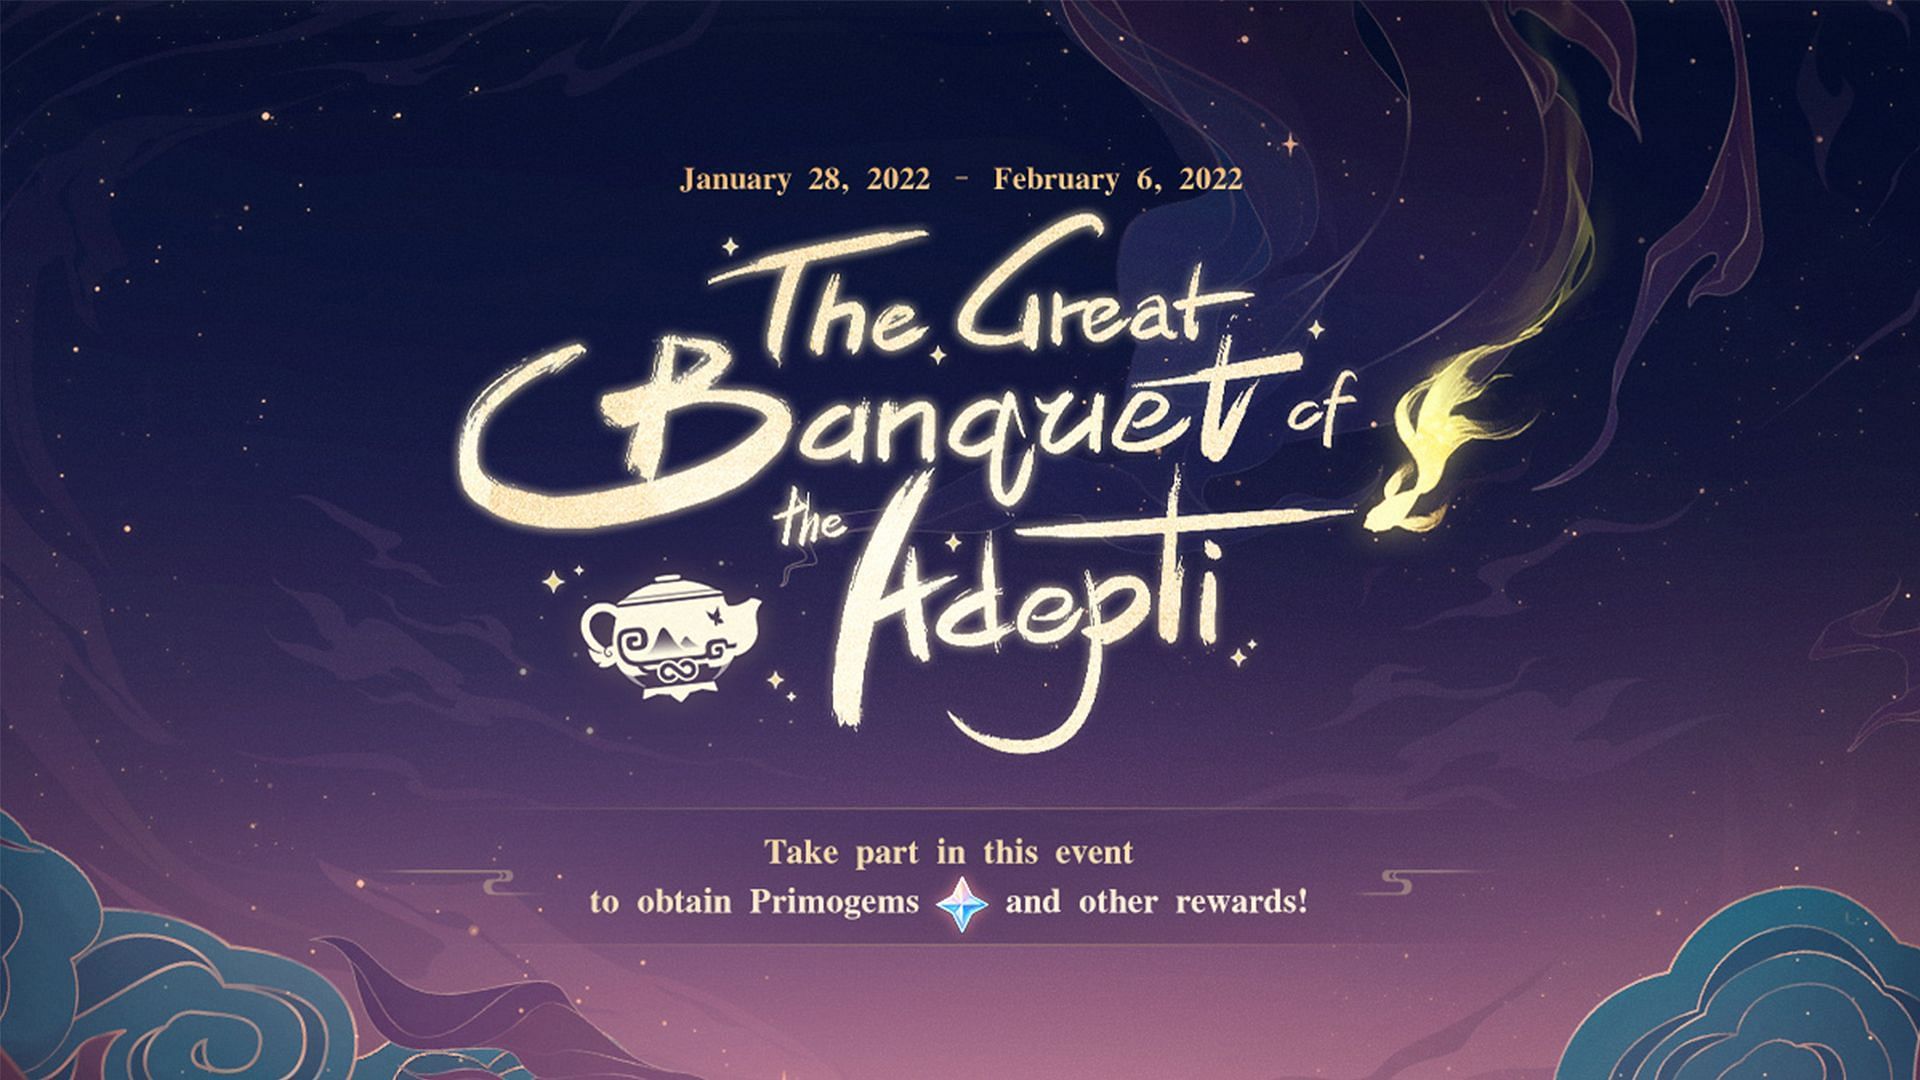 Genshin Impact&rsquo;s new web event: The Great Banquet of the Adepti (Image via miHoYo)